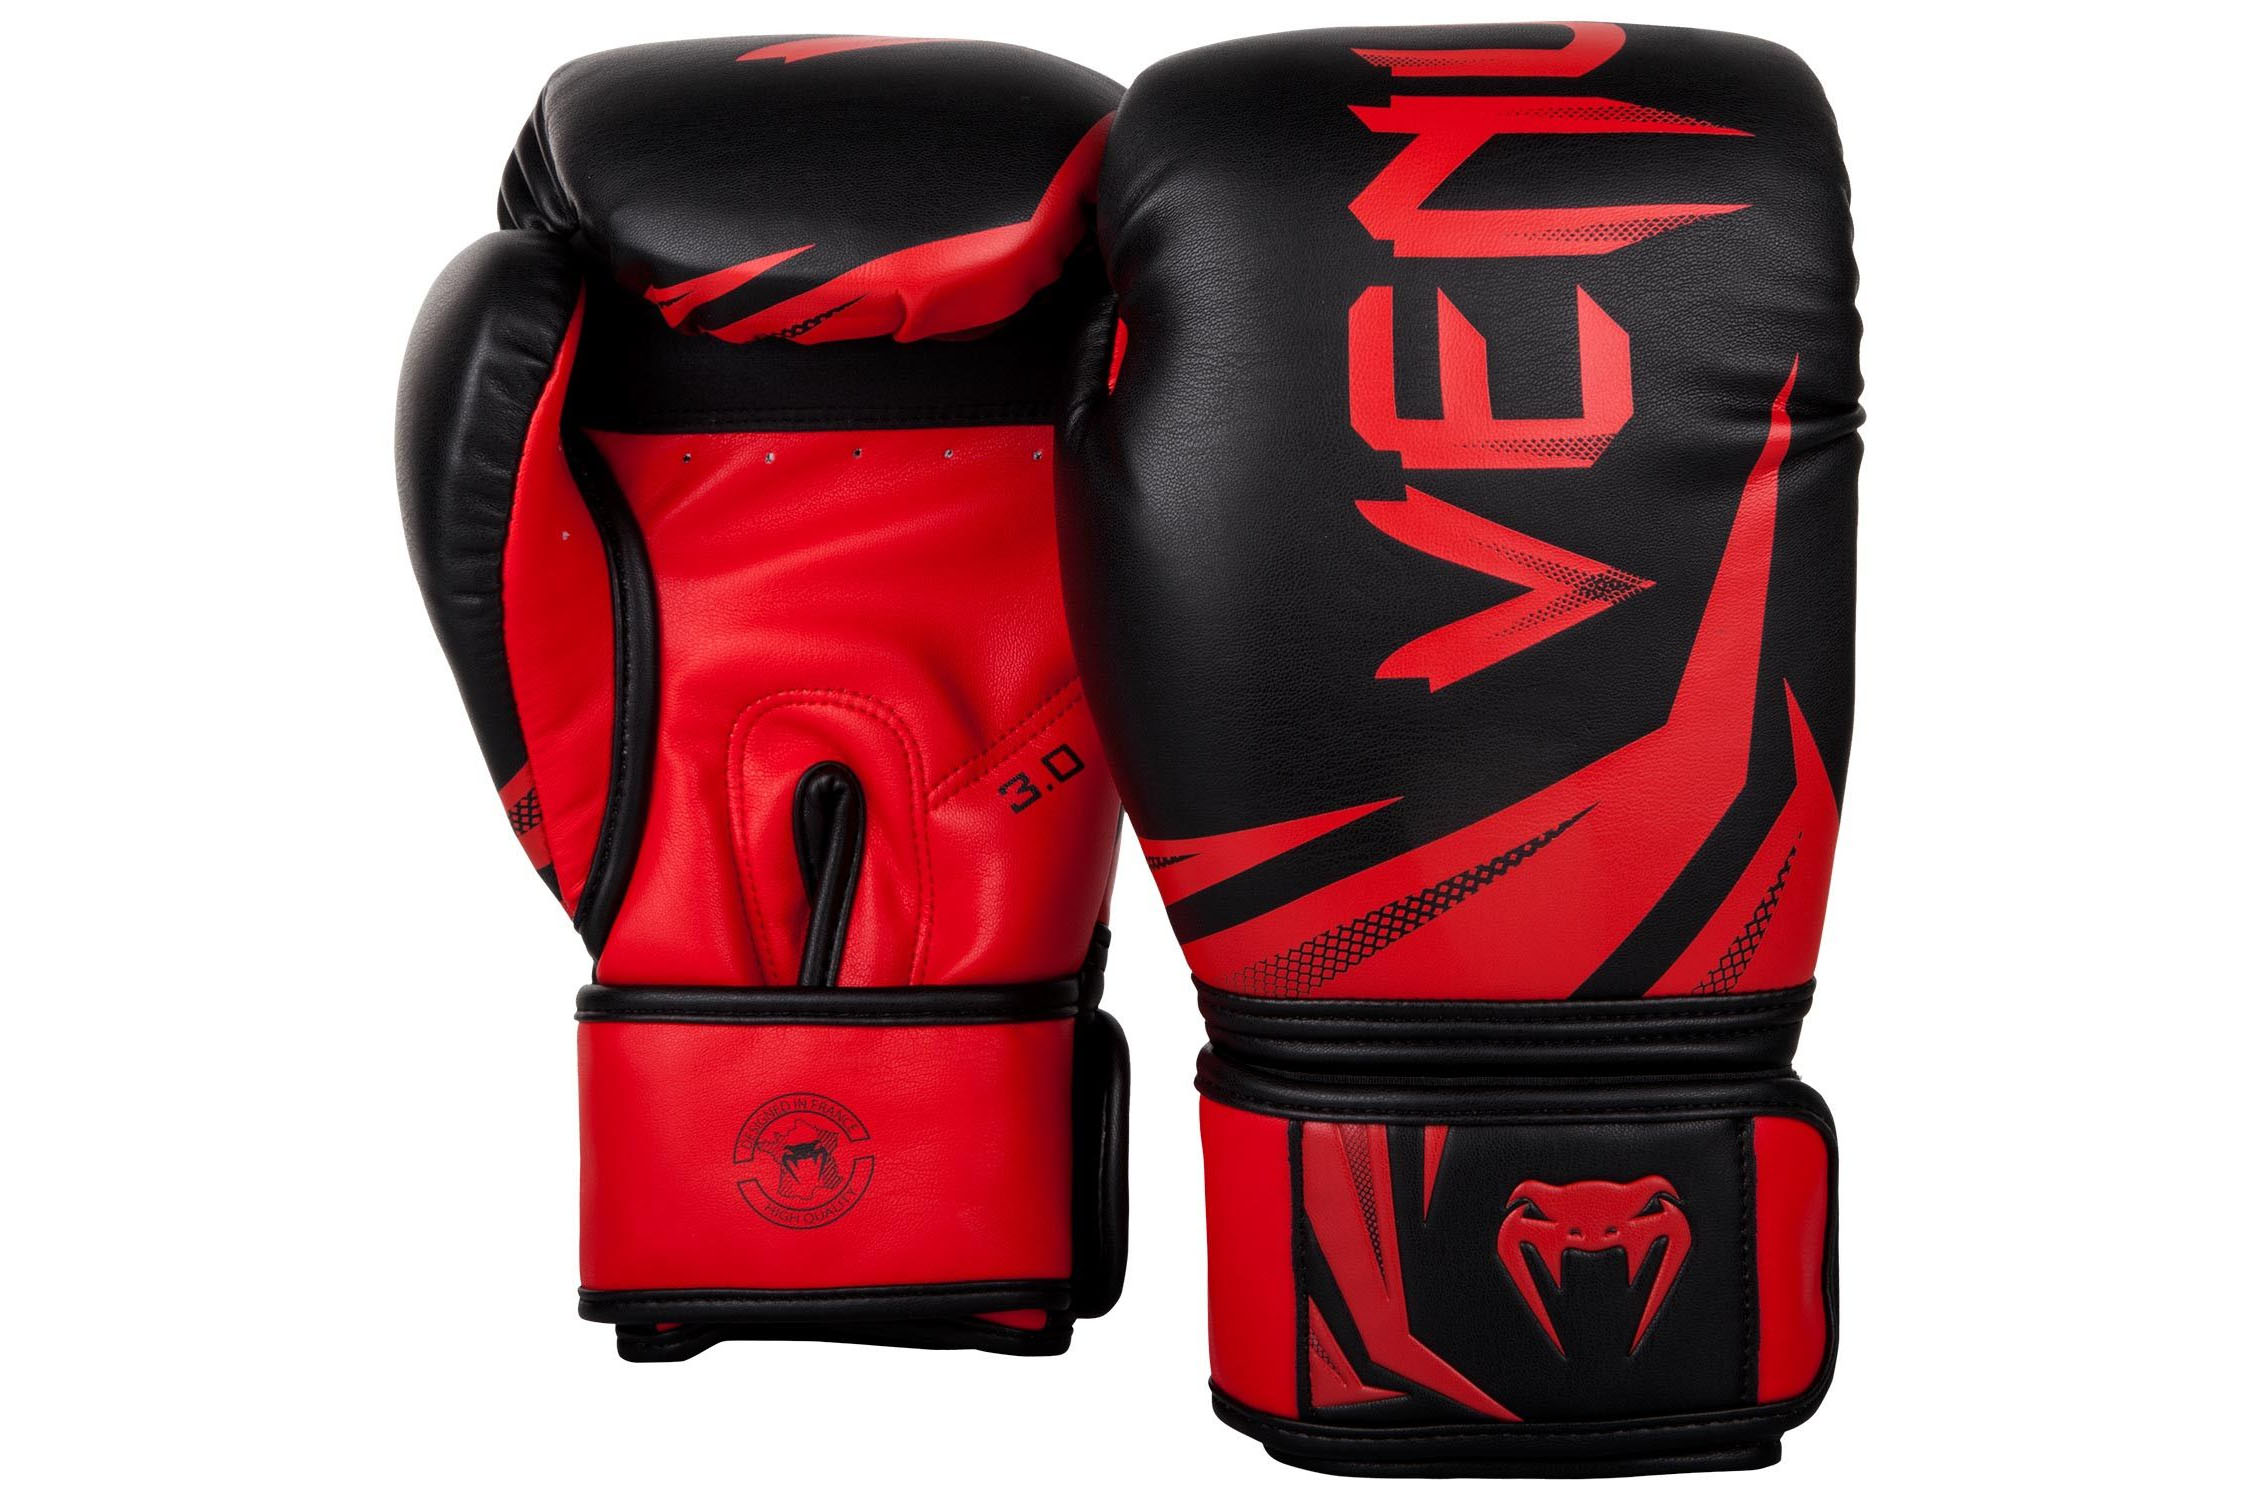 FOCUS PAD CHALLENGER DRAGON SPORTS Synthetic Leather Foam Martial Arts Boxing 